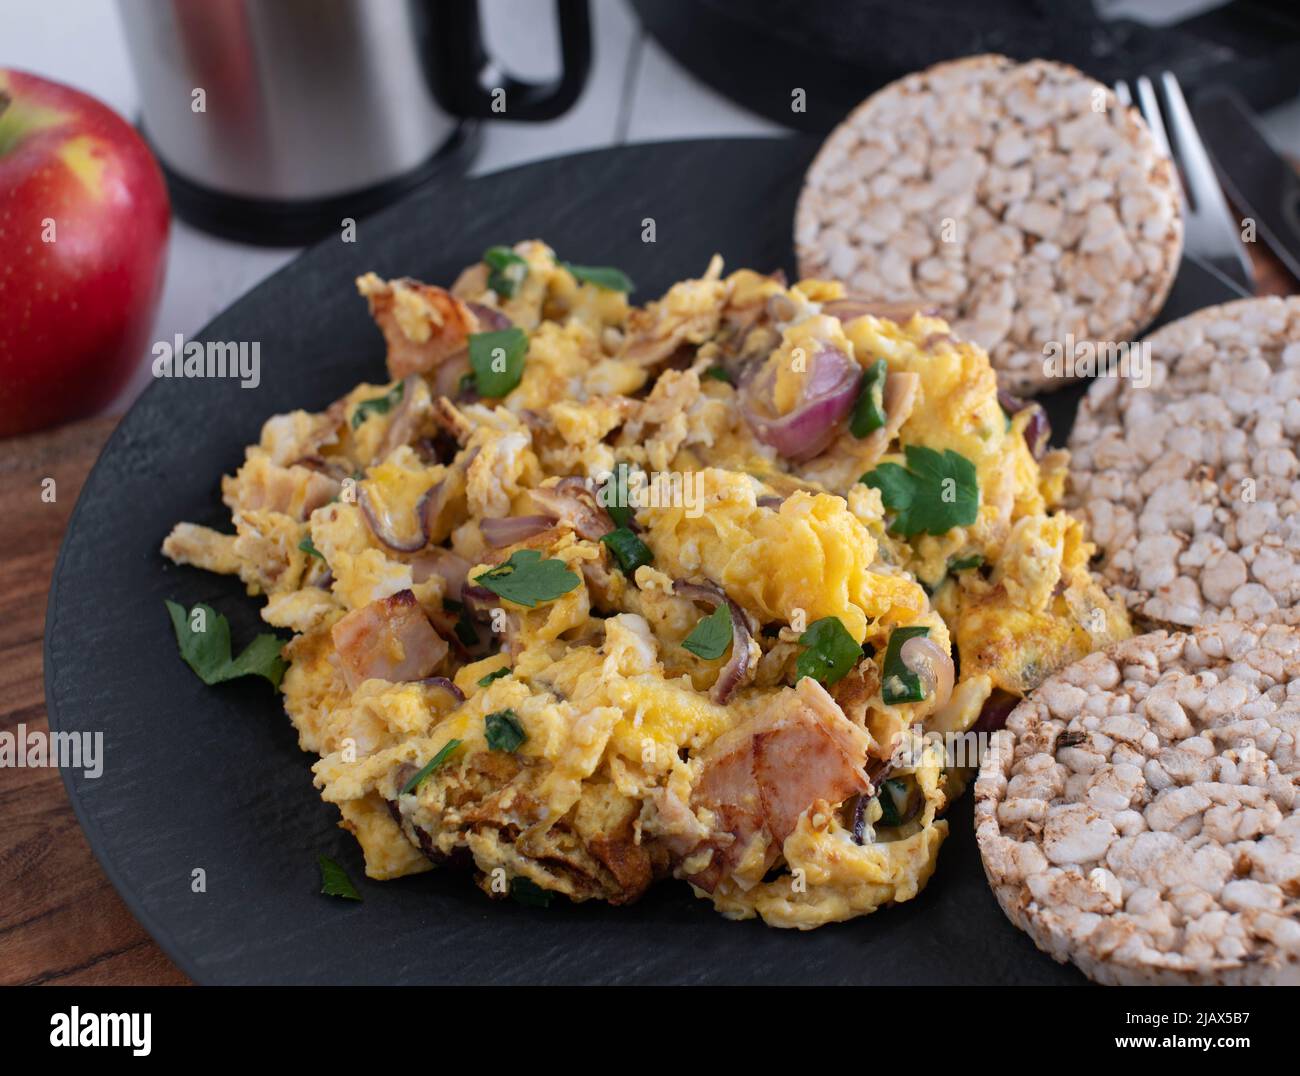 Workout meal with scrambled eggs, ham, onions and herbs. Served with brown rice cracker on a plate Stock Photo